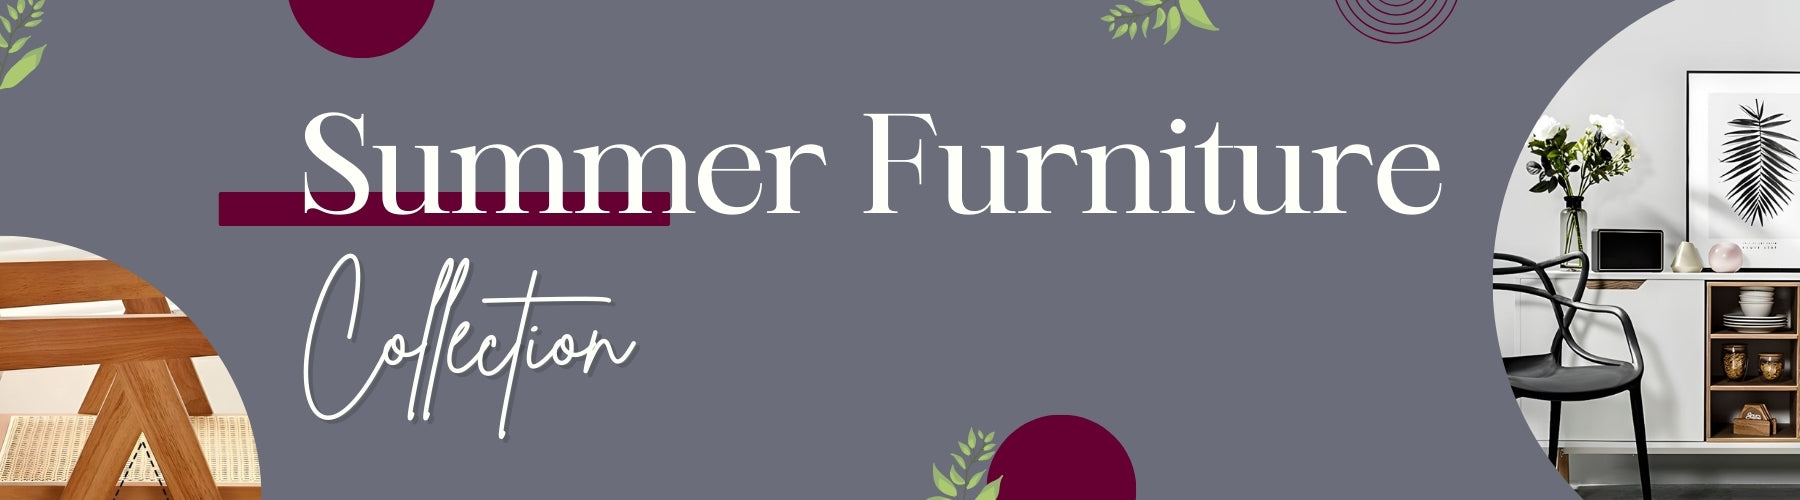 nuvo italia summer furniture collection banner.